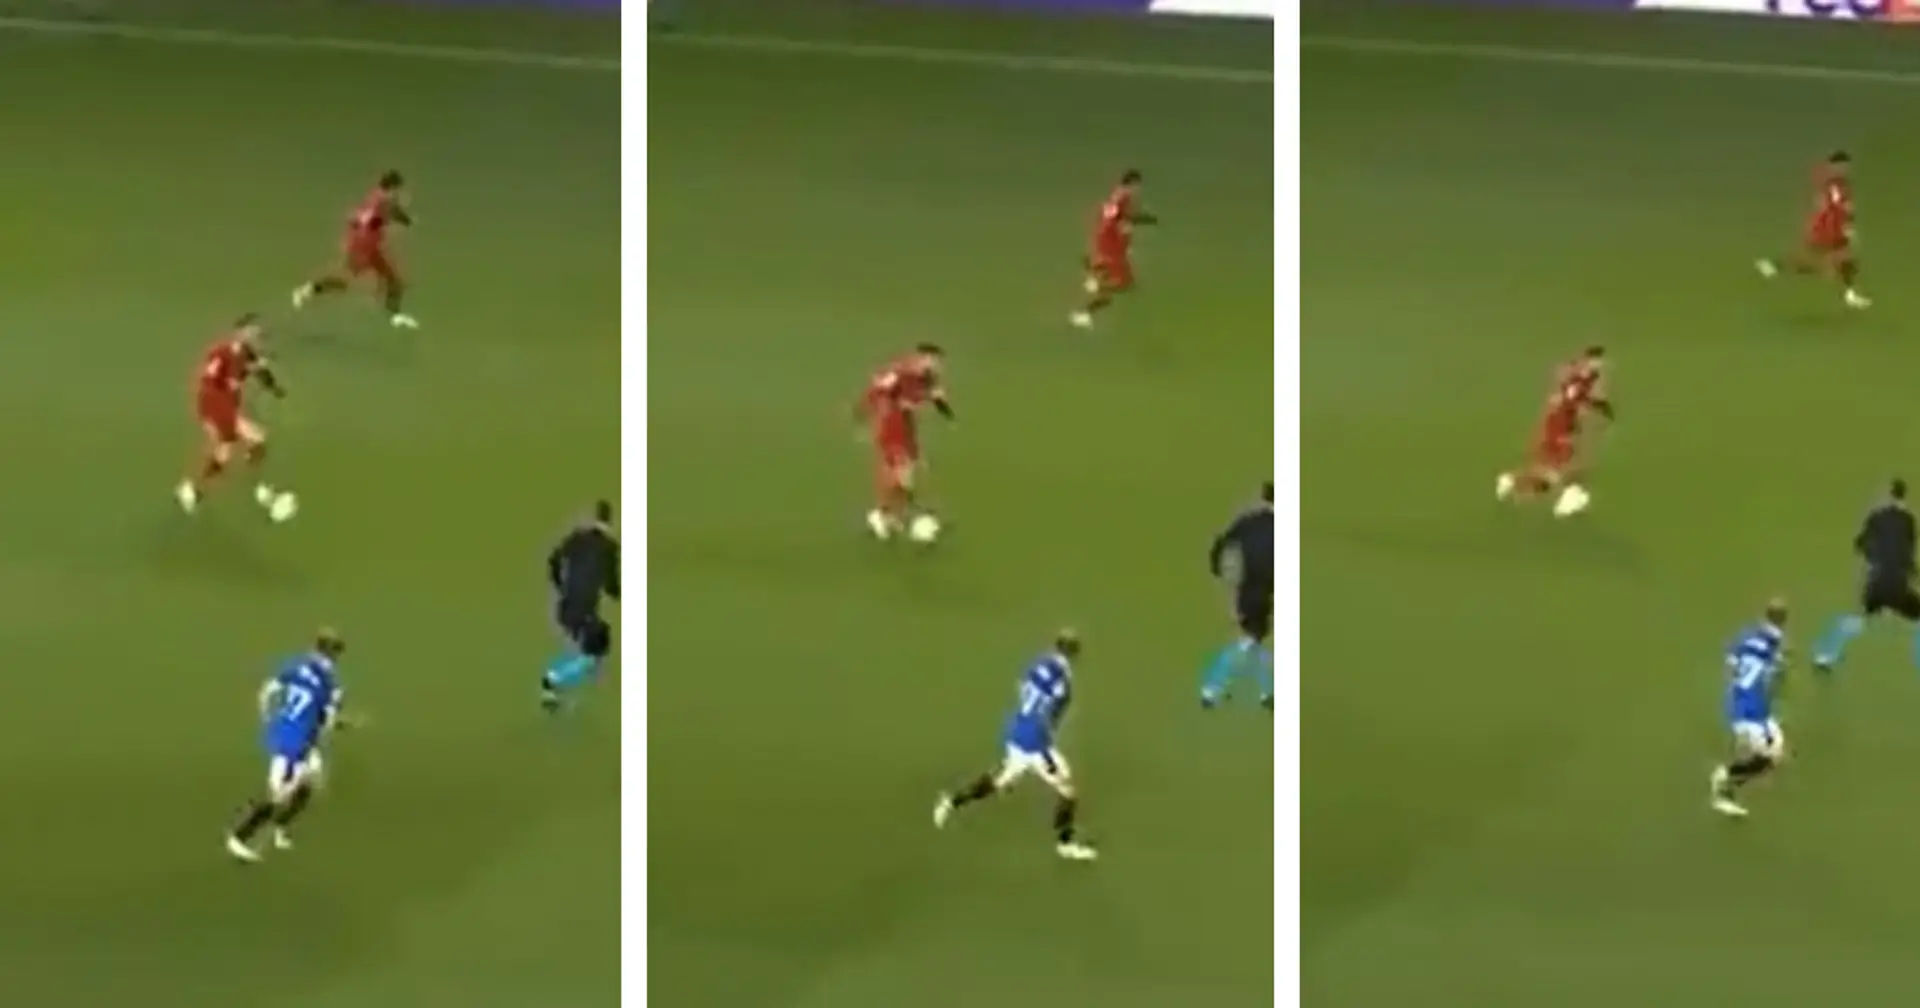 Footage of Jordan Henderson taking 4 touches to control the ball — and nearly falling over — goes viral